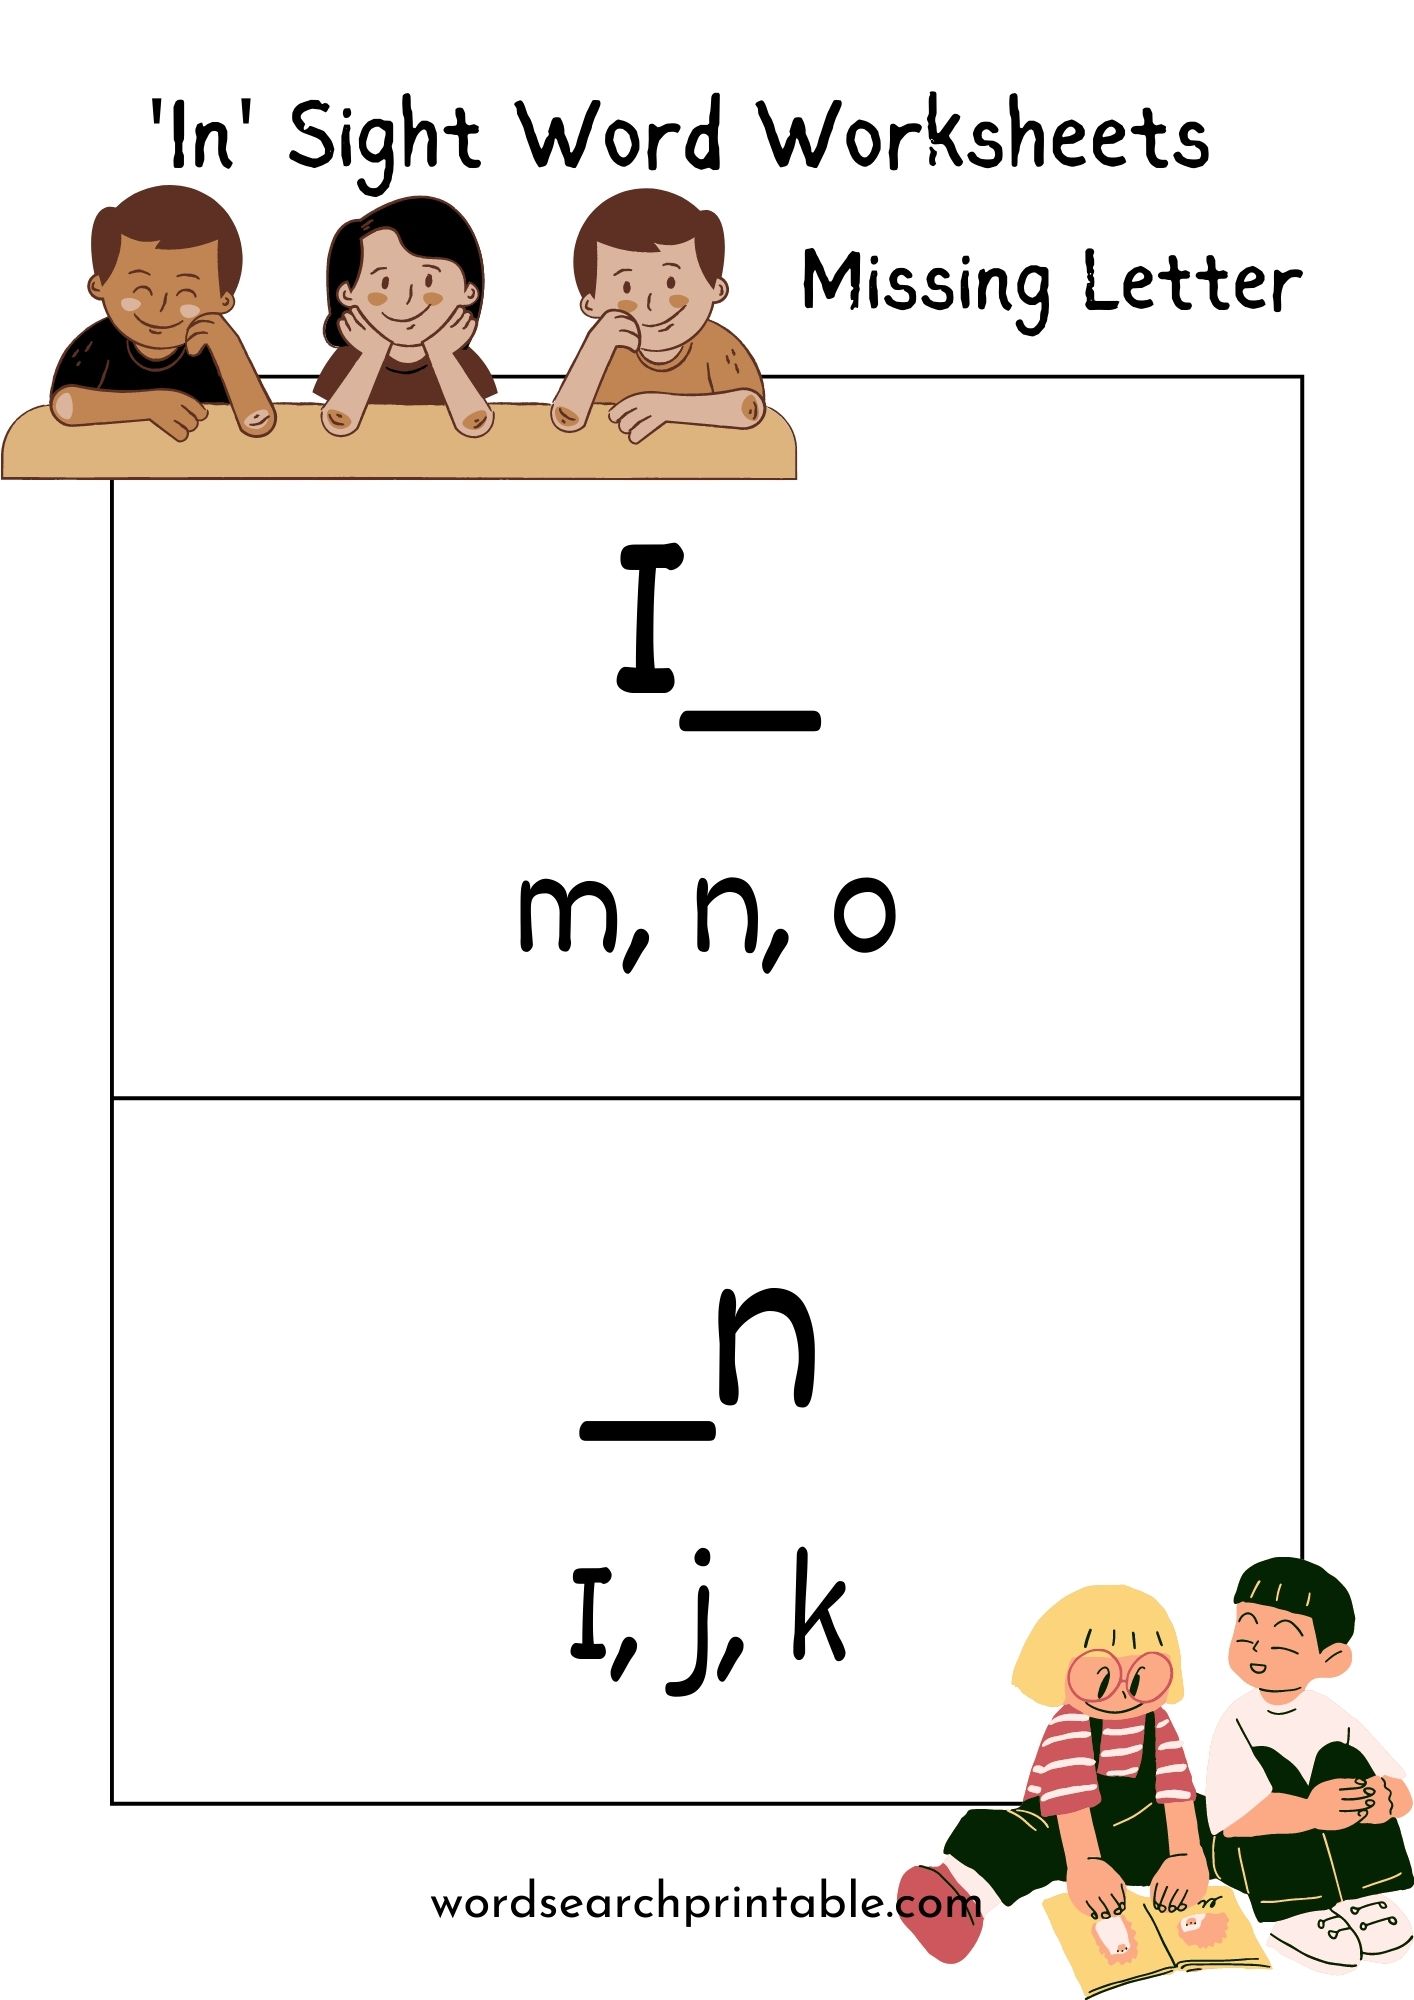 Find the missing letter in sight word In